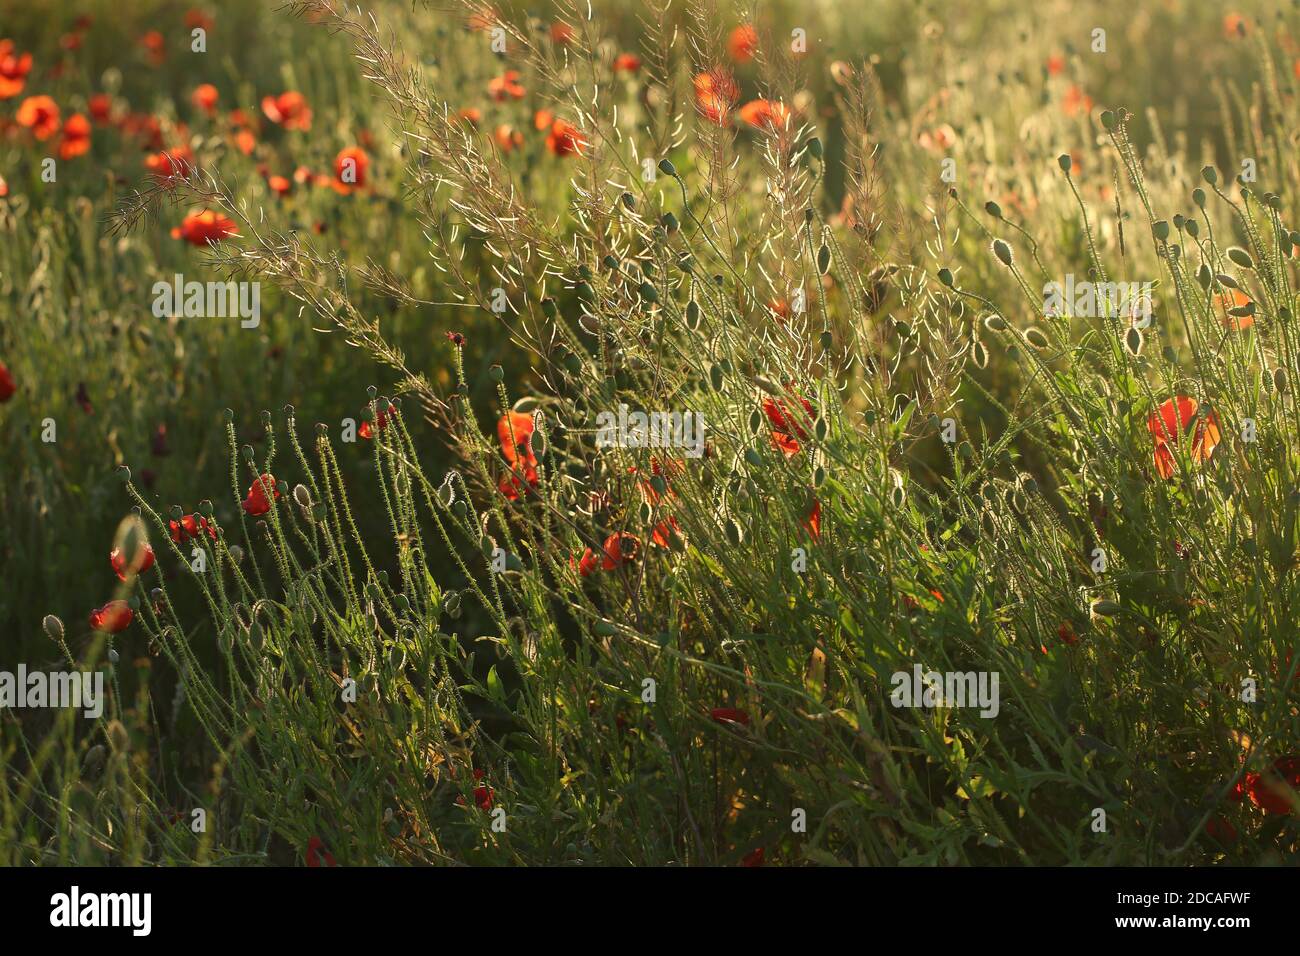 Blooming red poppies in a field Stock Photo